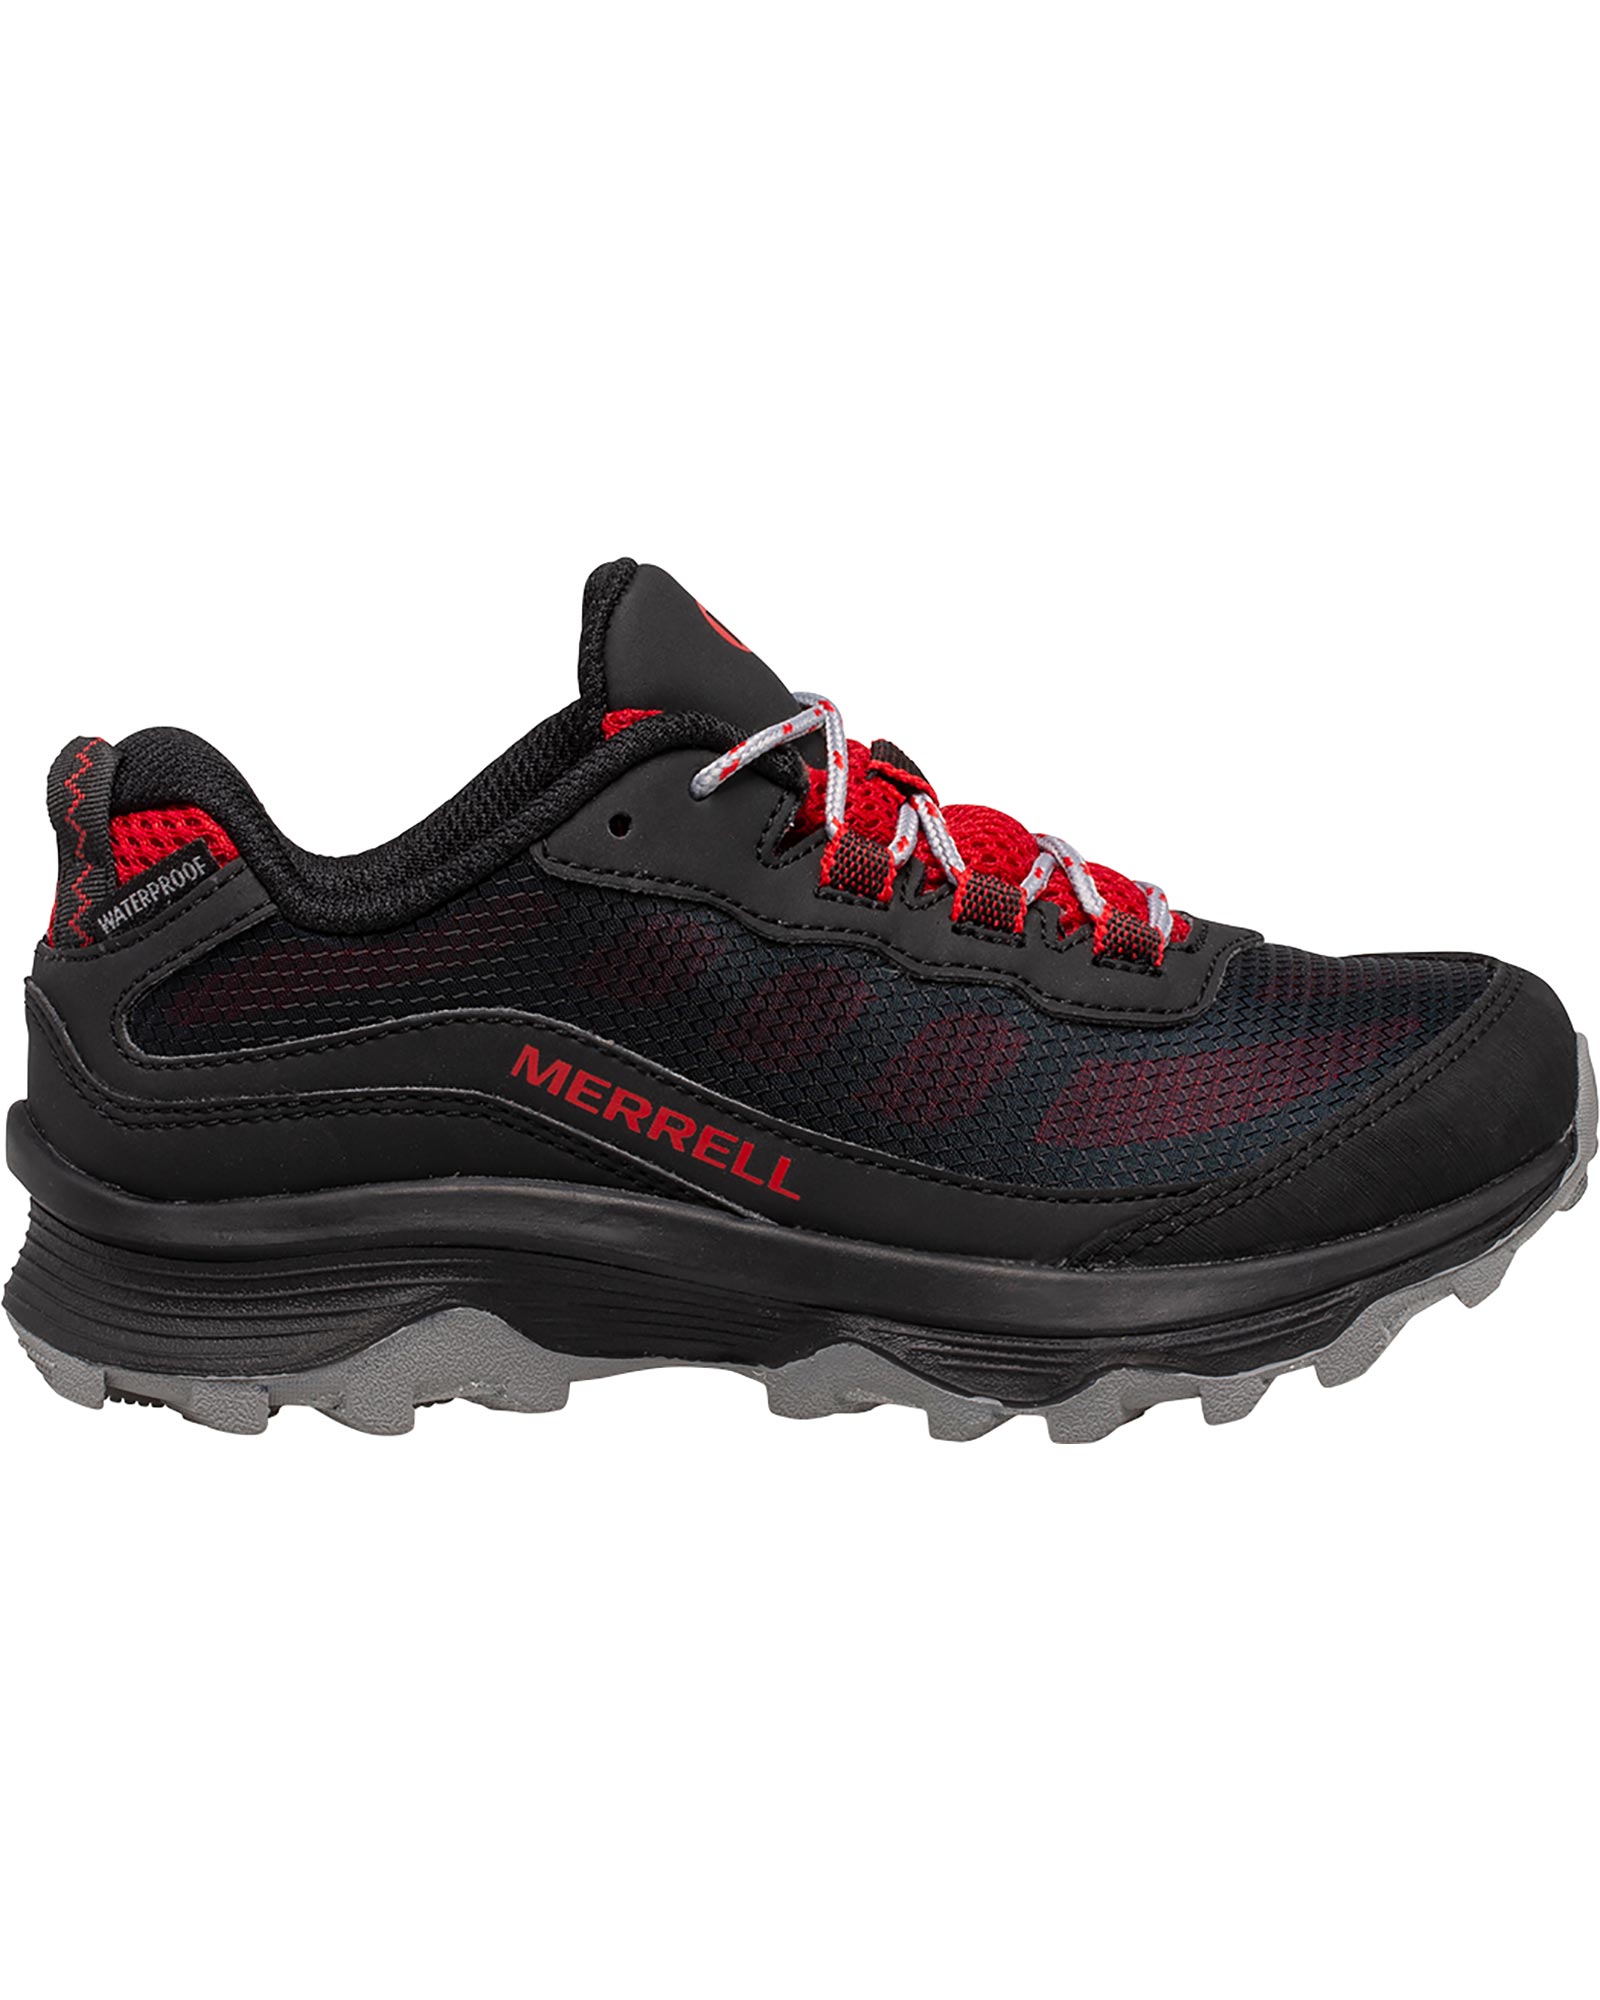 Merrell Moab Speed Laces Kids’ Waterproof Shoes - Grey/Black/Red UK 2